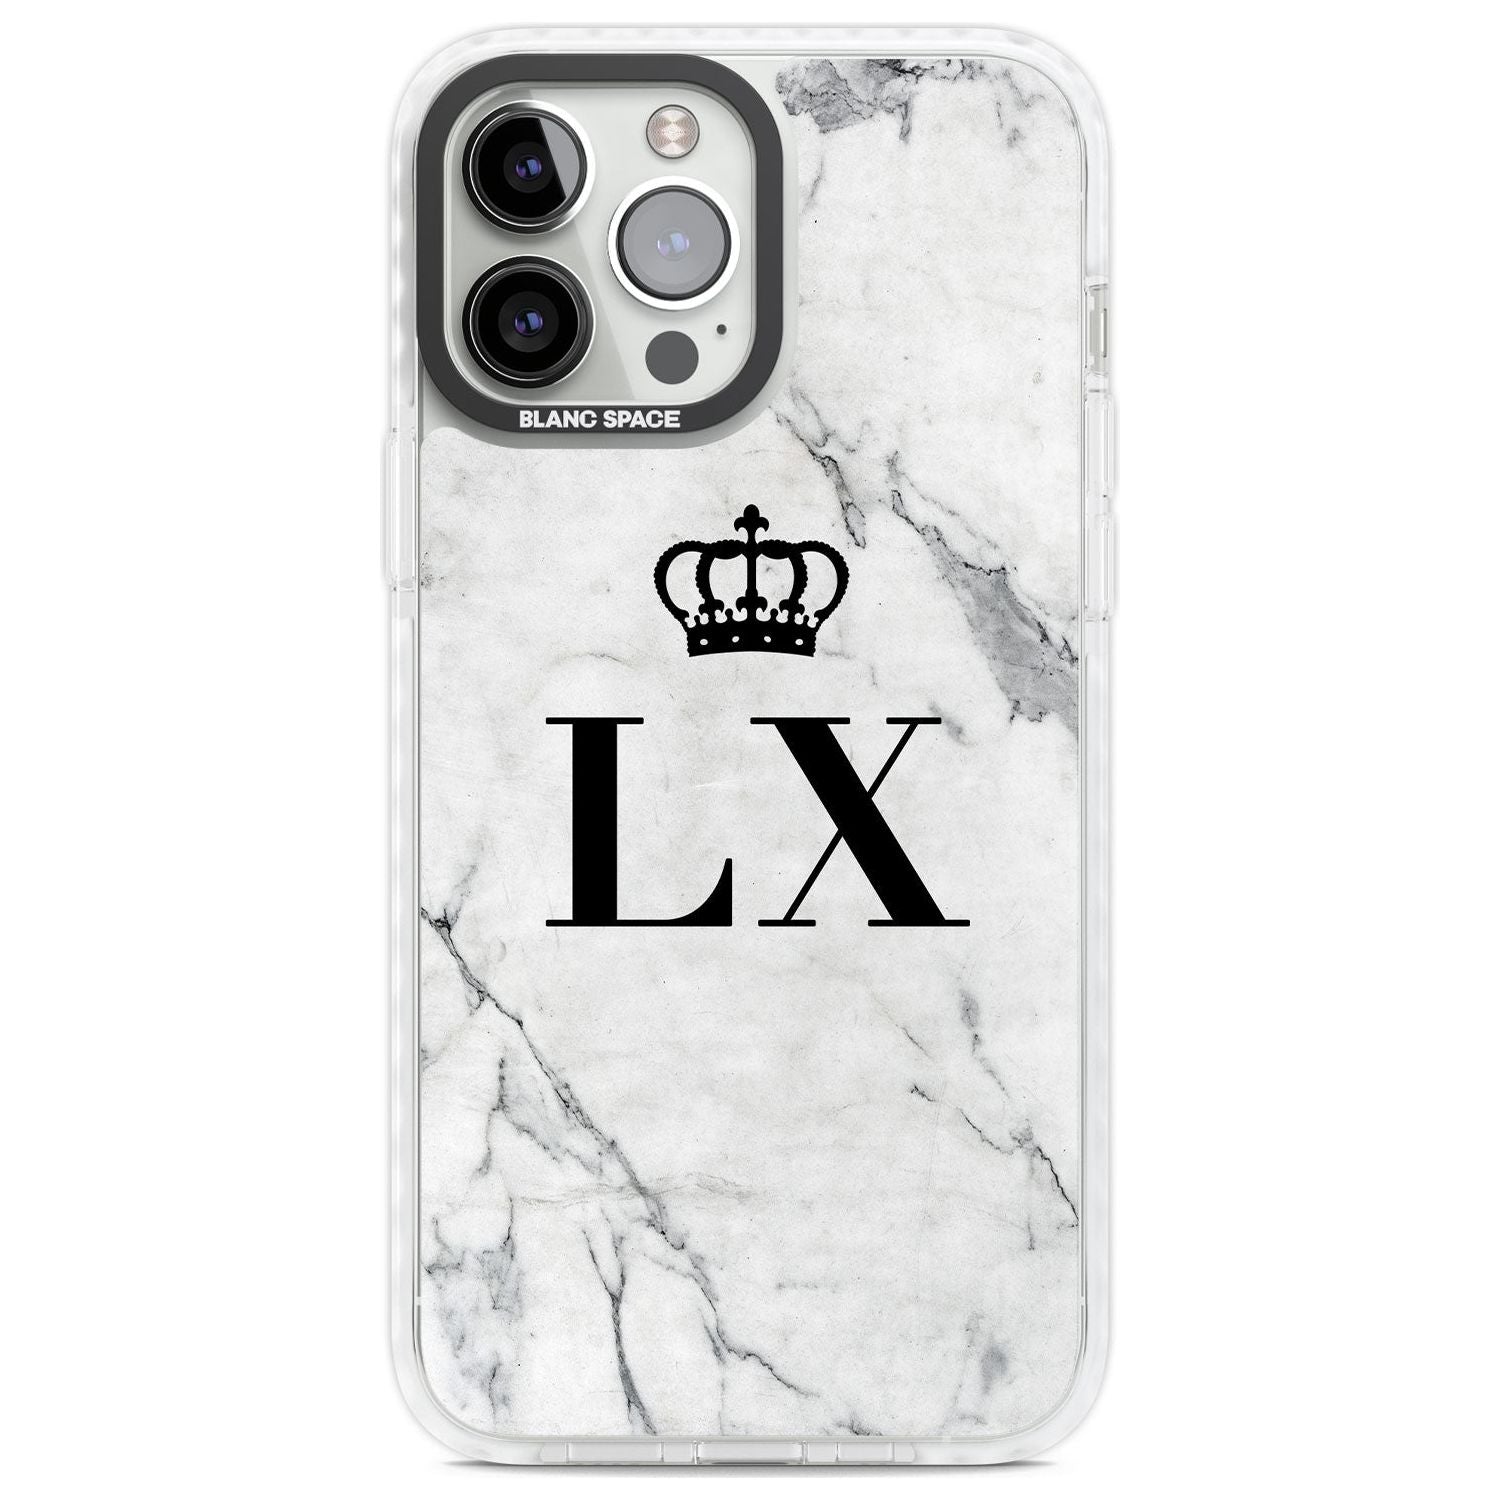 Personalised Initials with Crown on White Marble Custom Phone Case iPhone 13 Pro Max / Impact Case,iPhone 14 Pro Max / Impact Case Blanc Space